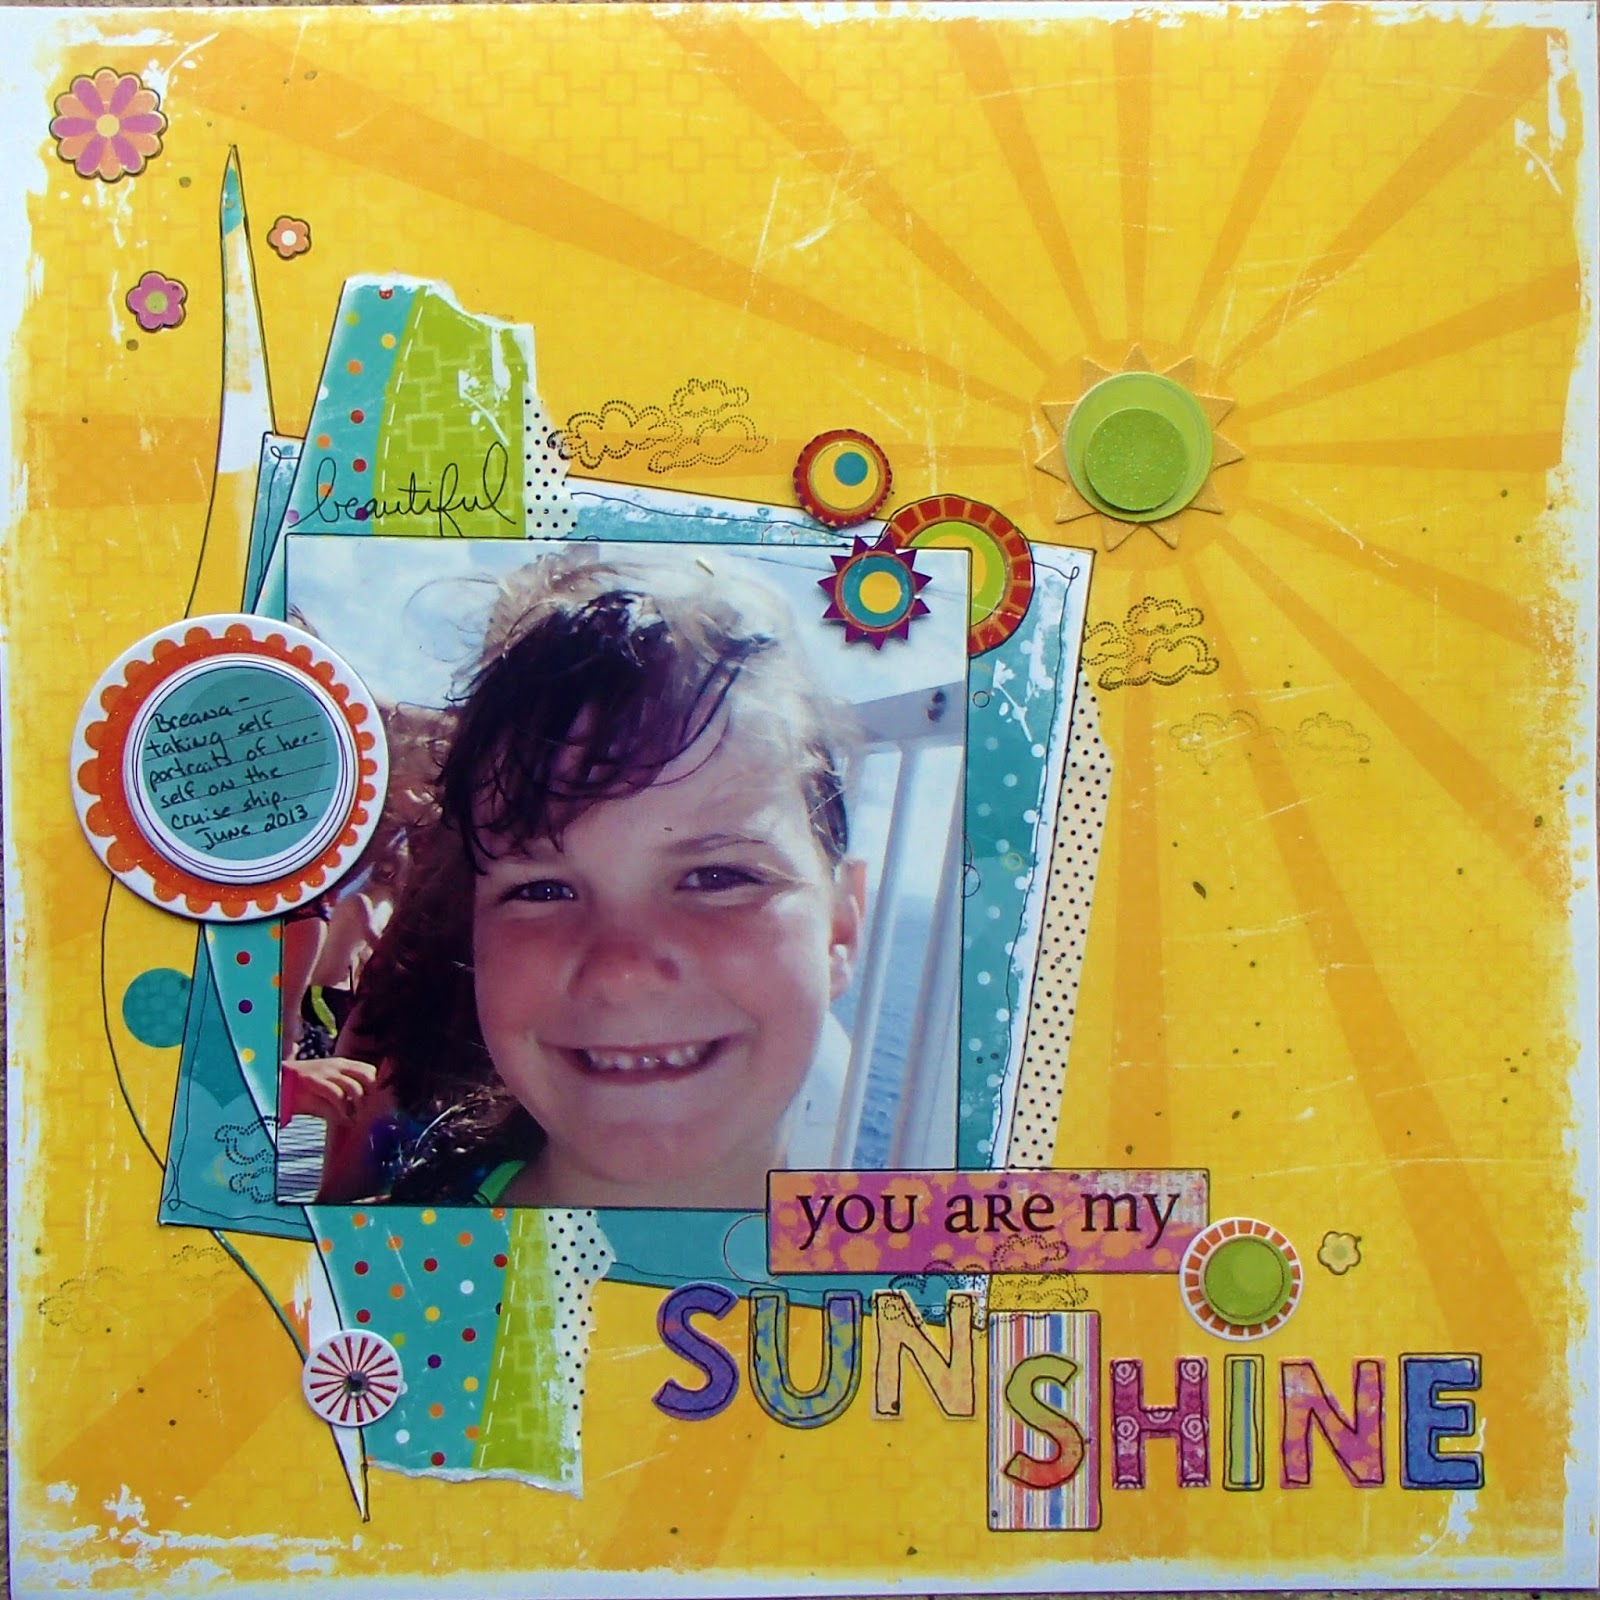 “You are my sunshine, my only sunshine…” | by Kelli Green | Medium